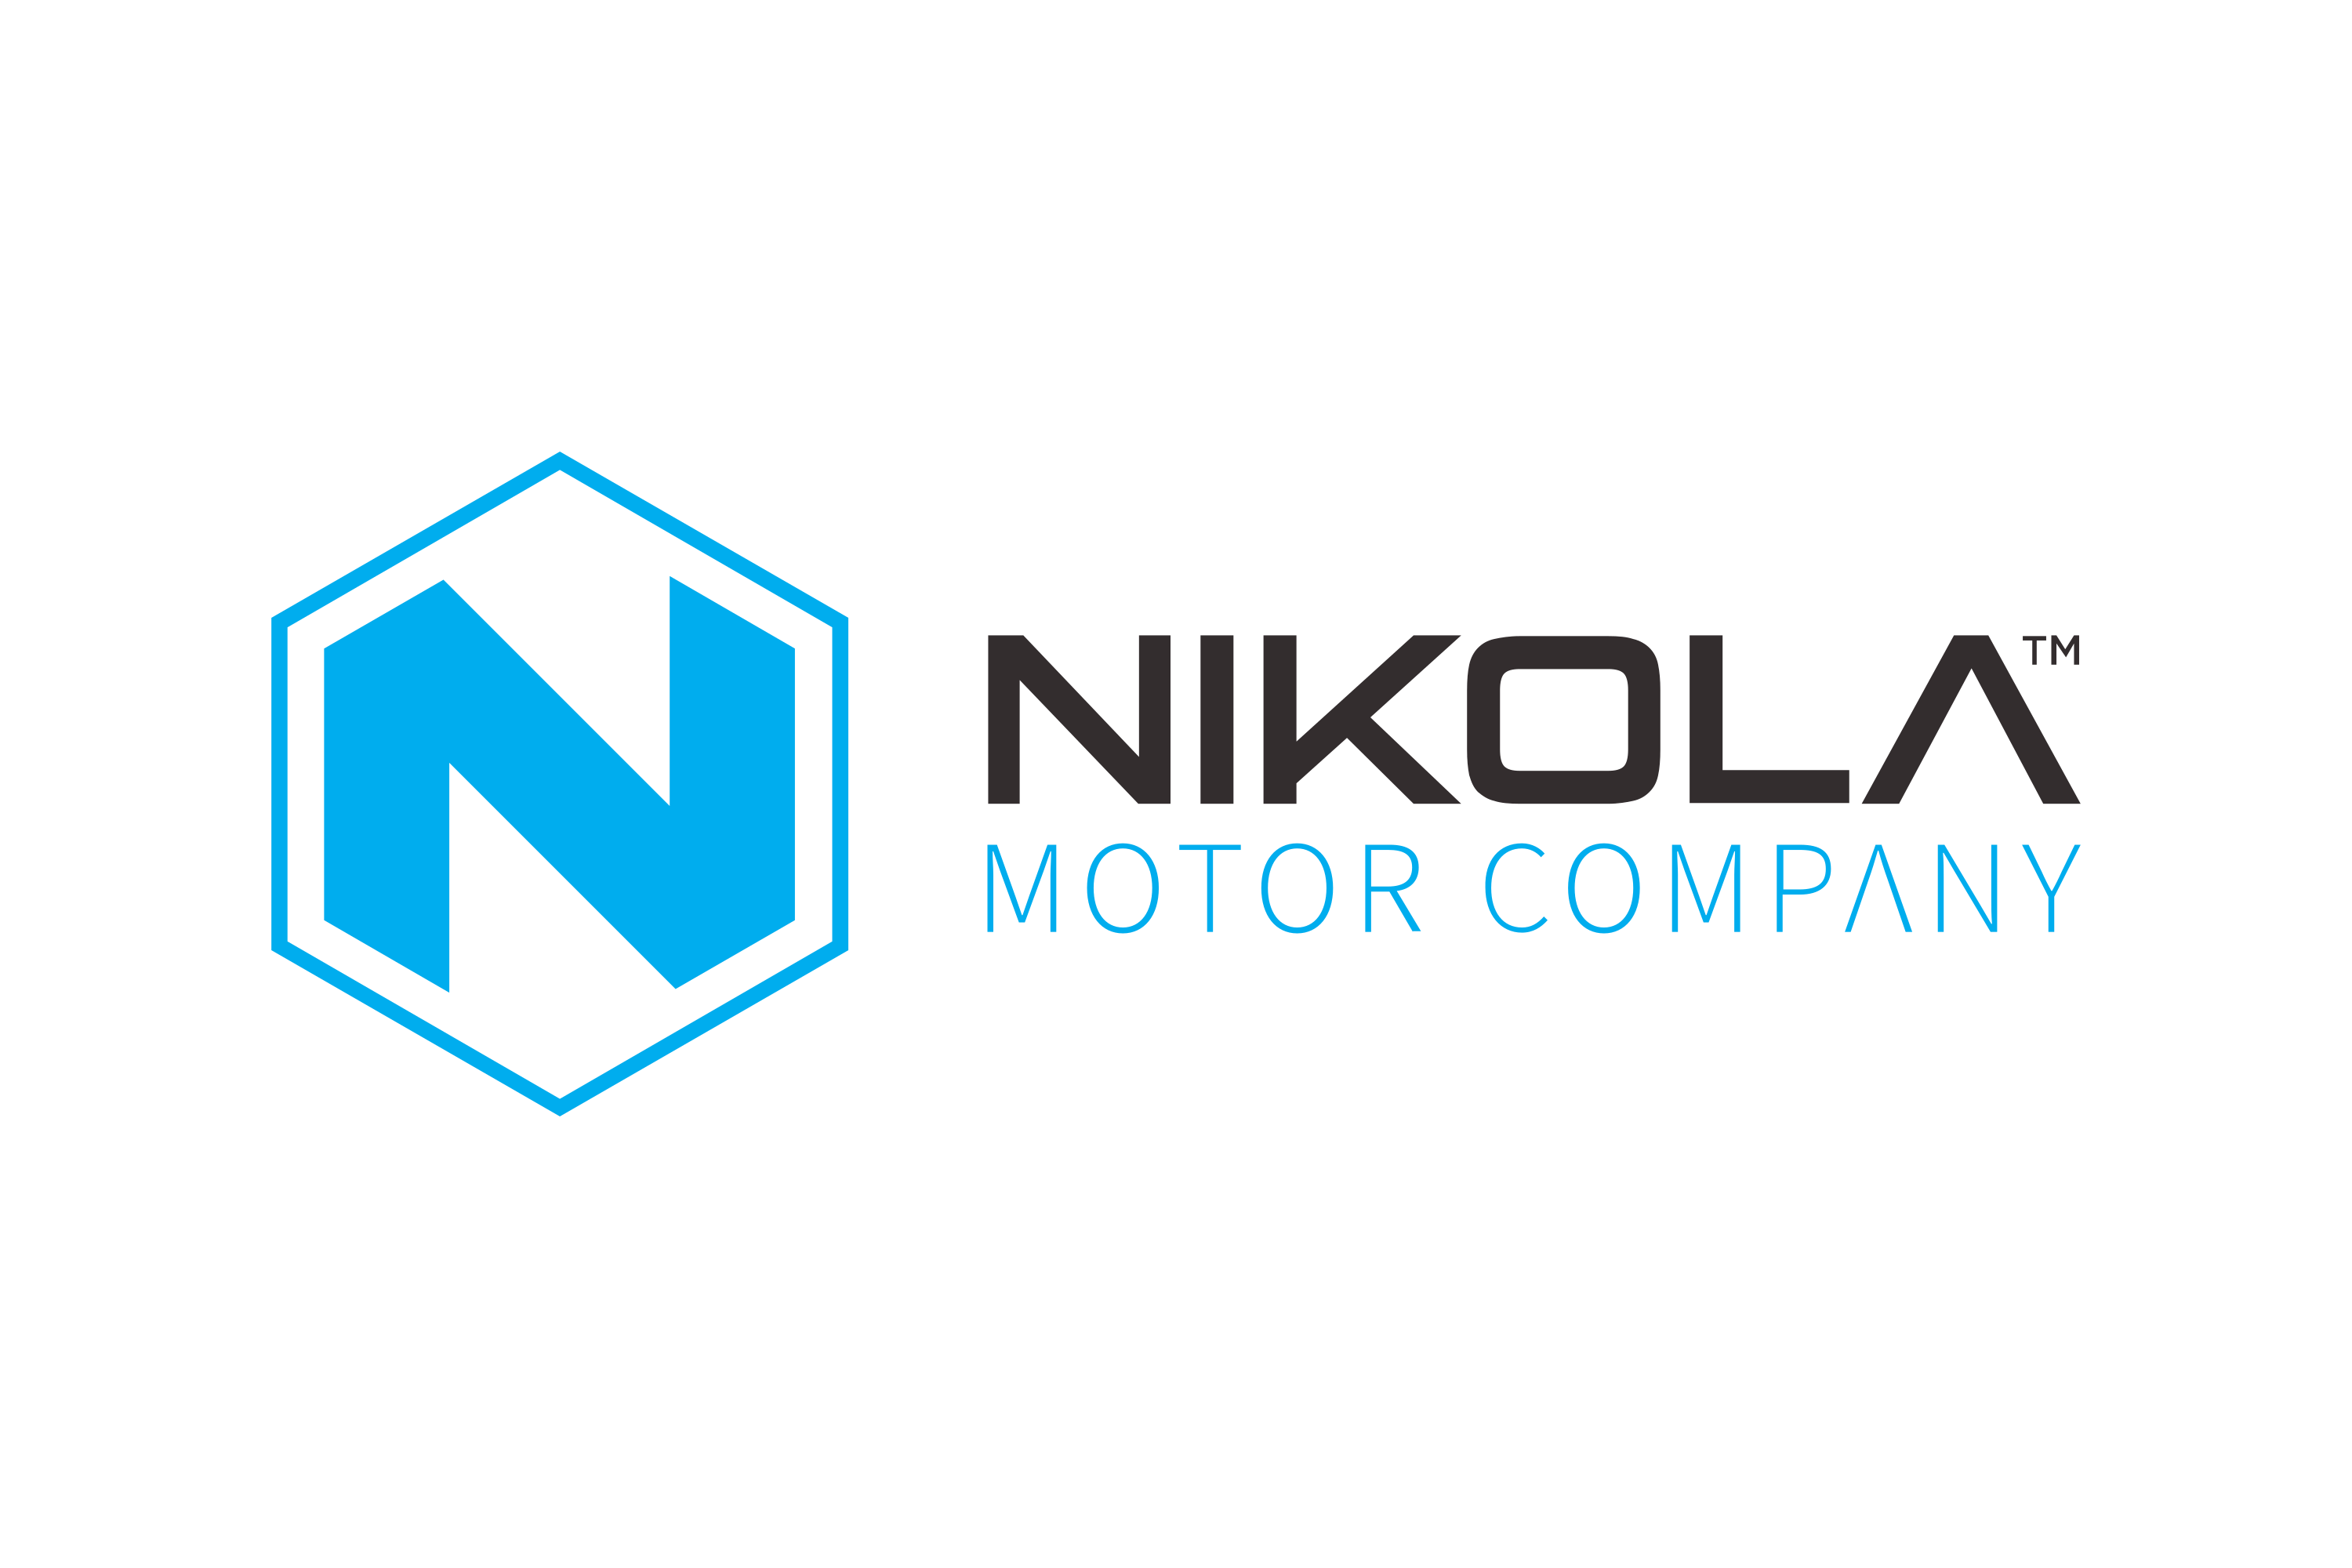 Nikola, Super Micro Computer And Other Big Losers From Monday